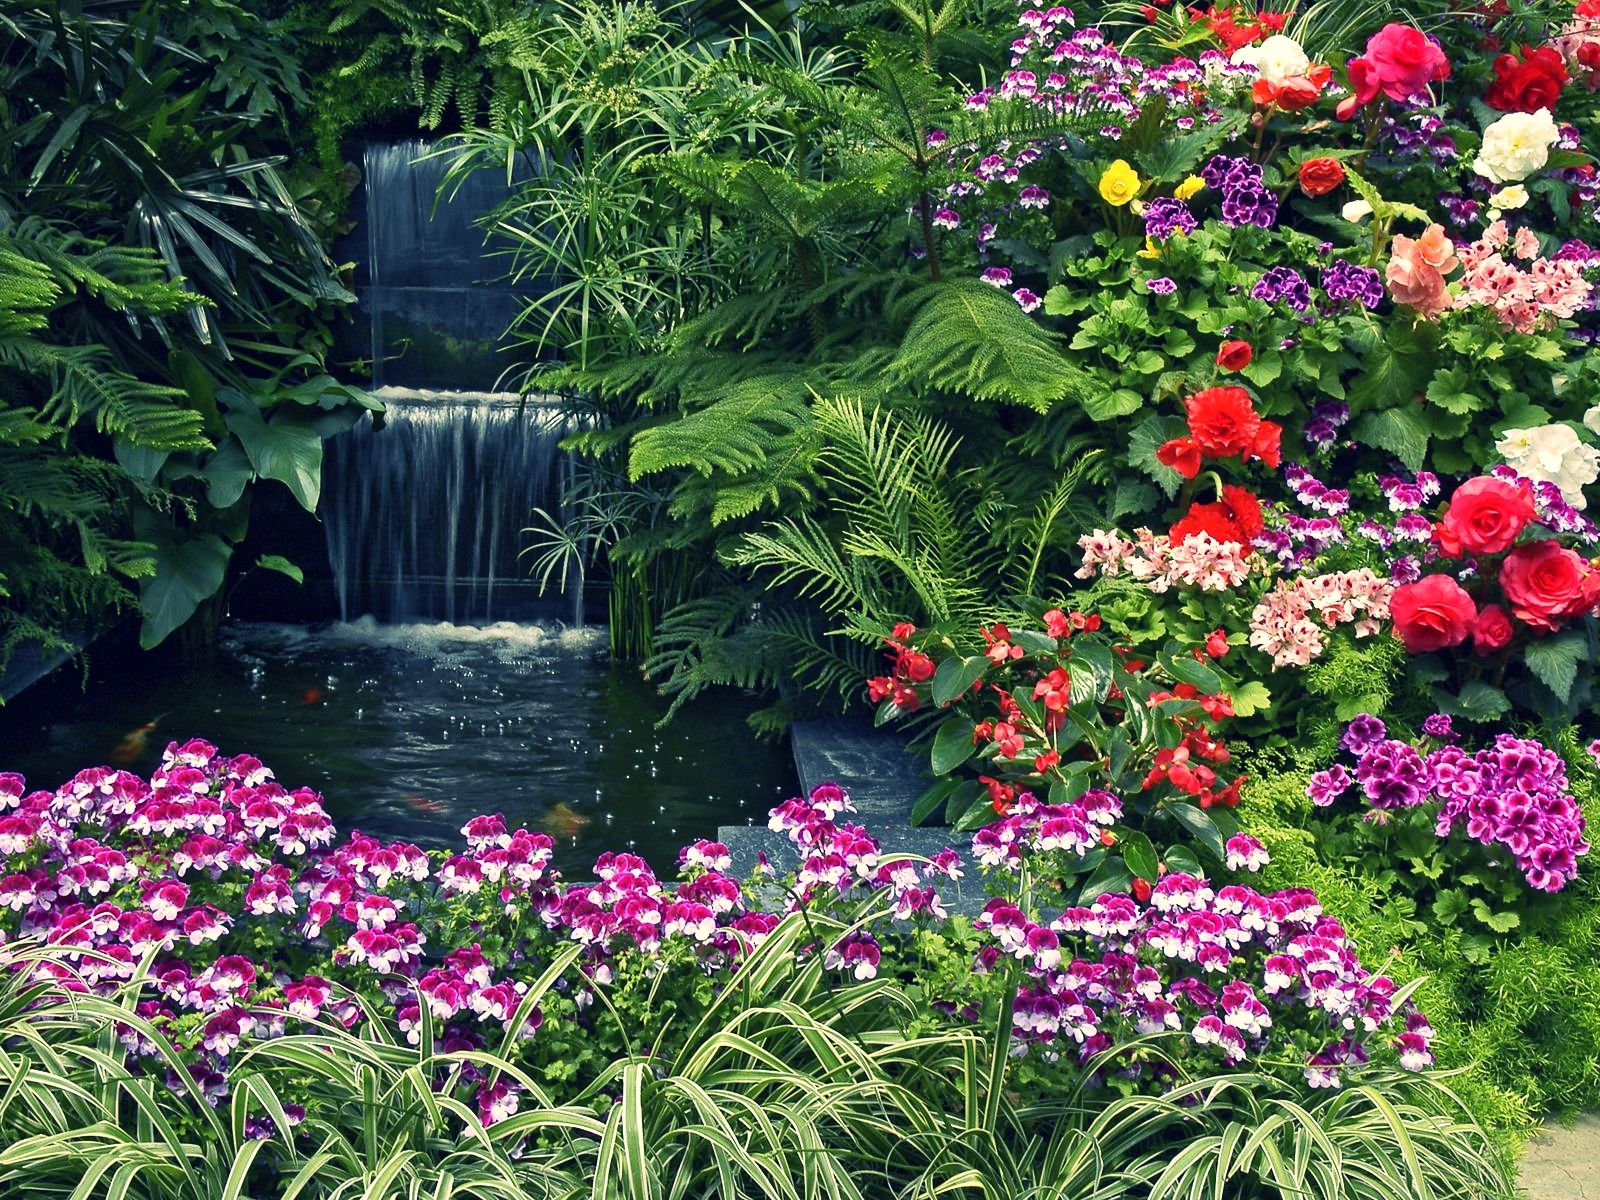 pictures of waterfalls and flowers